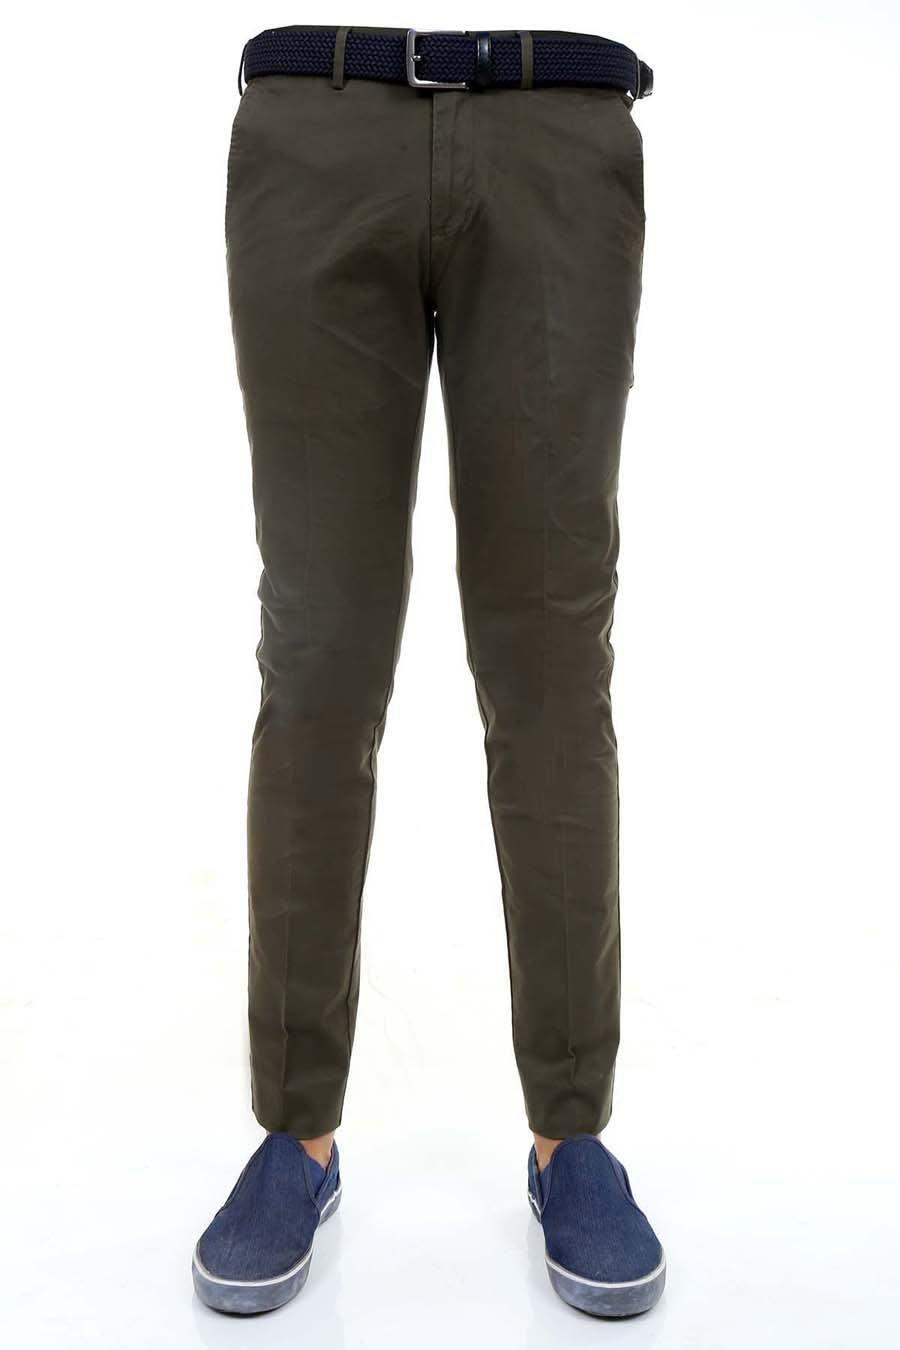 Casual Pant Cross Pocket Olive - Slim Fit at Charcoal Clothing